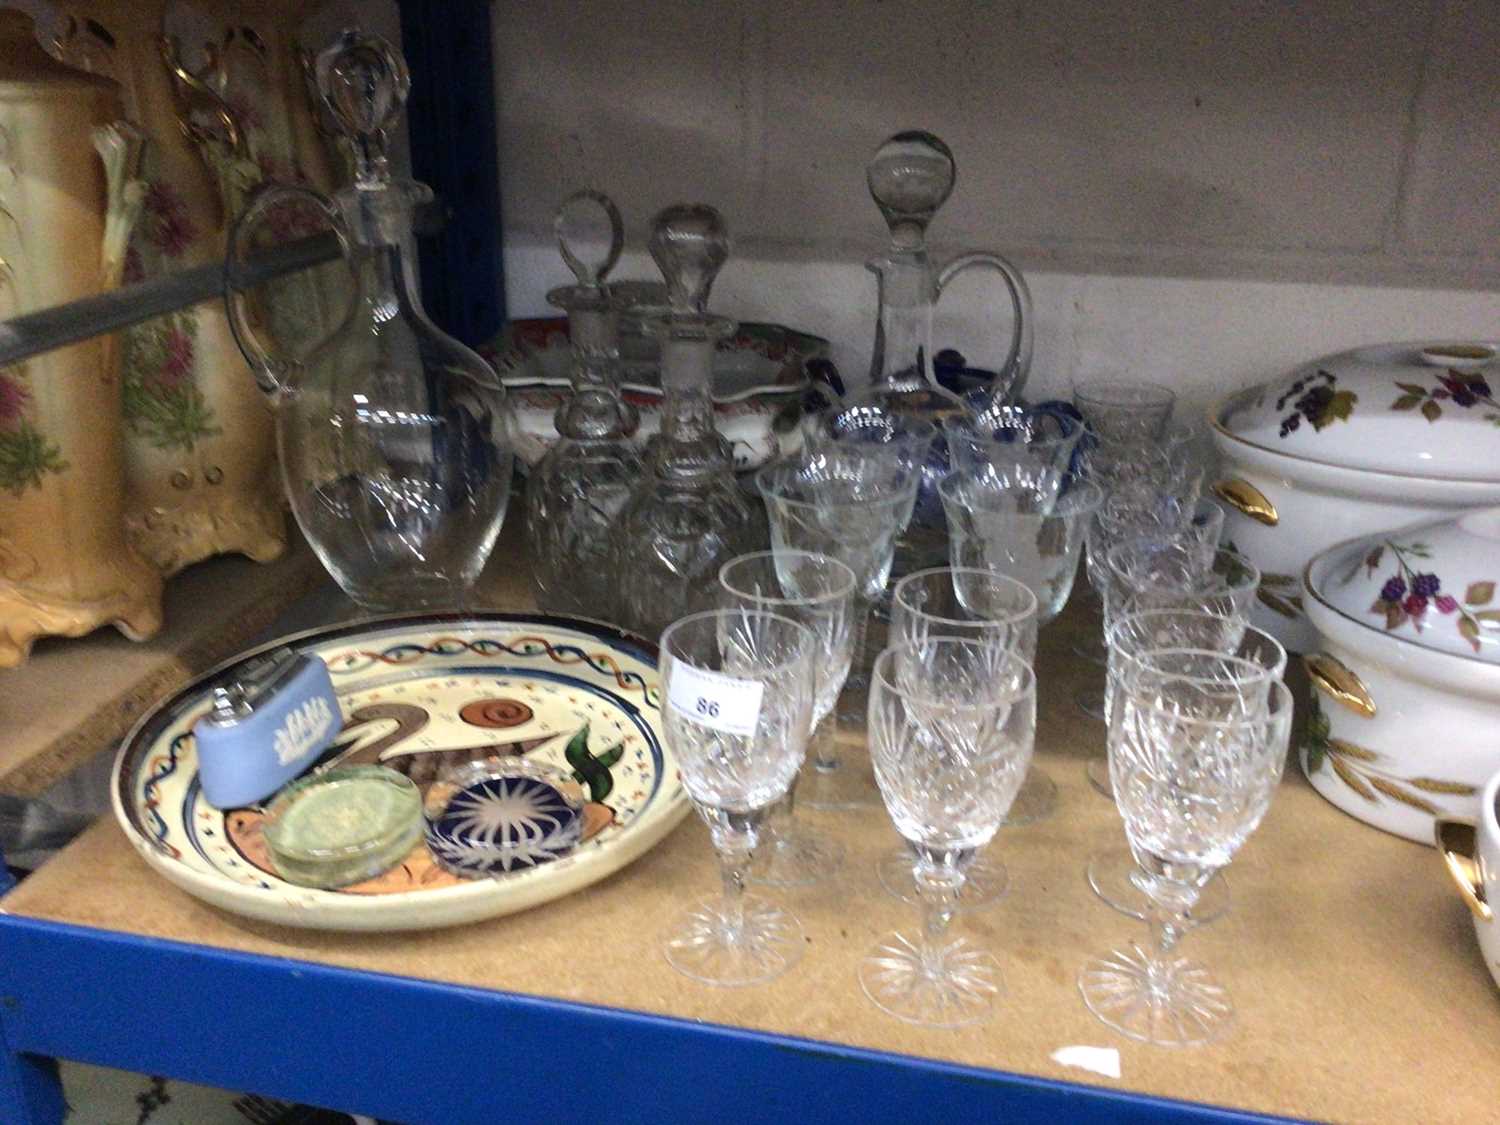 Lot 86 - Group of good quality glassware, decanters and other decorative ceramics